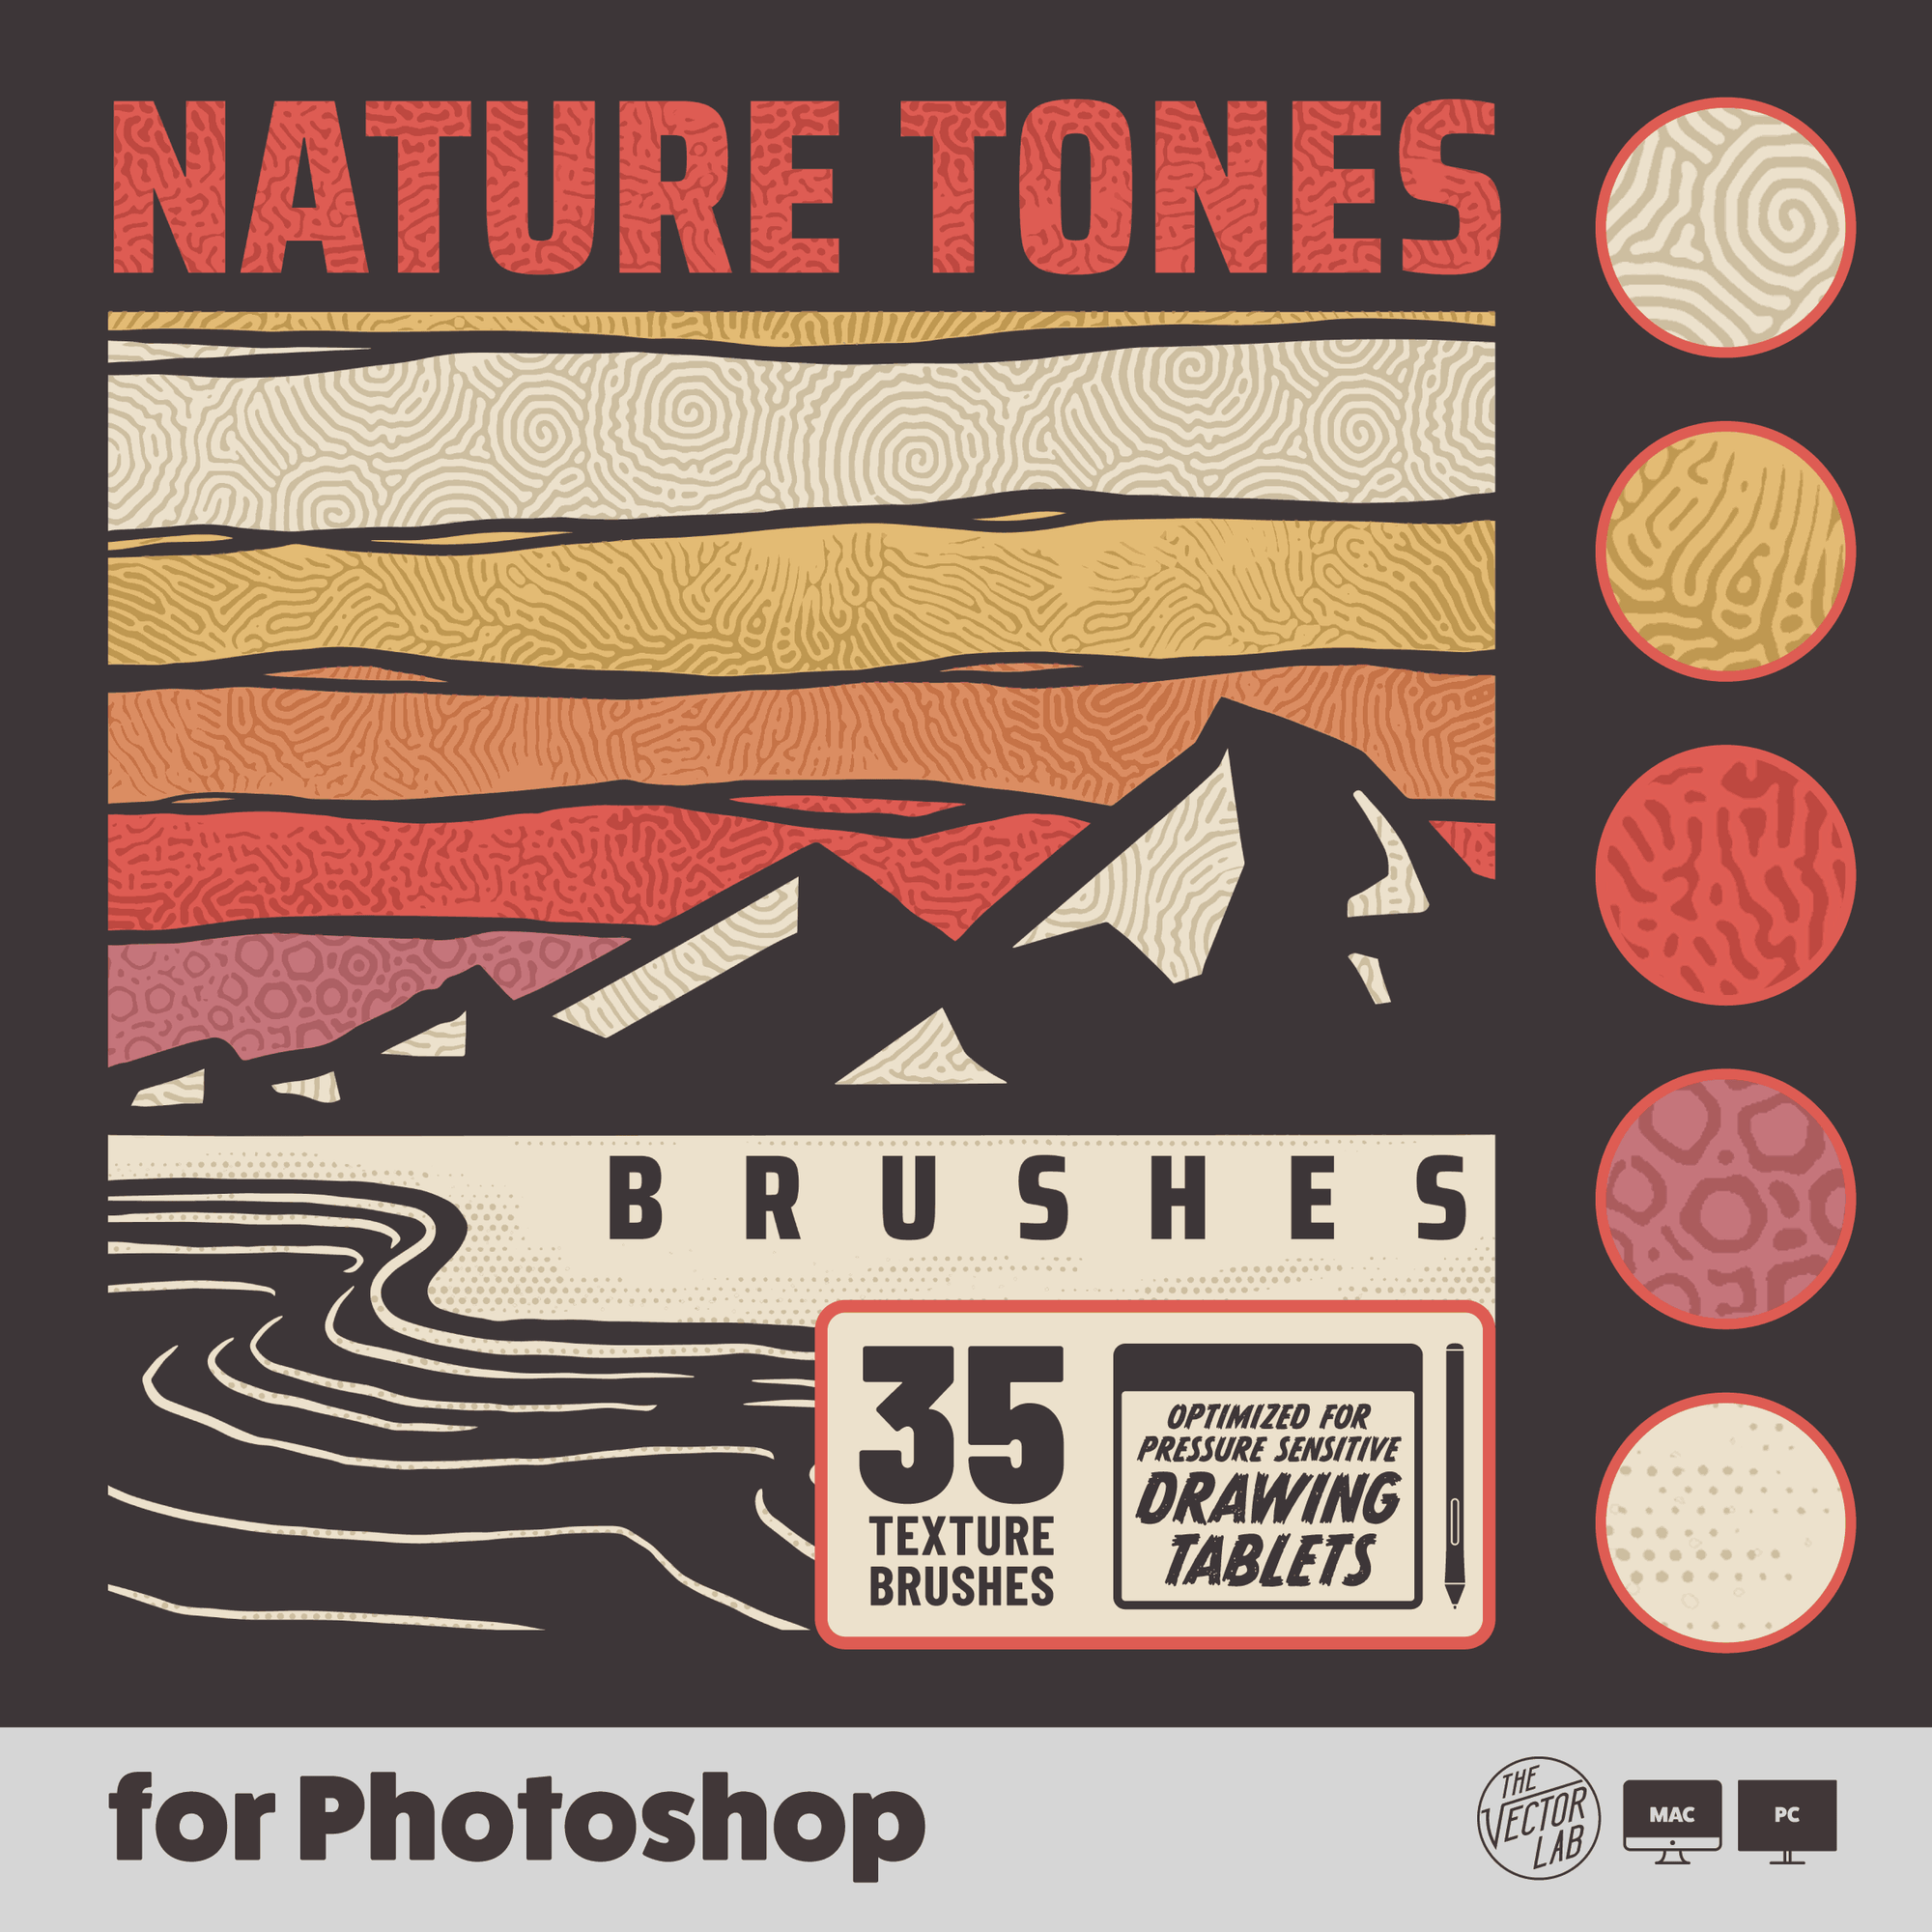 Nature Tones Brushes for Photoshop